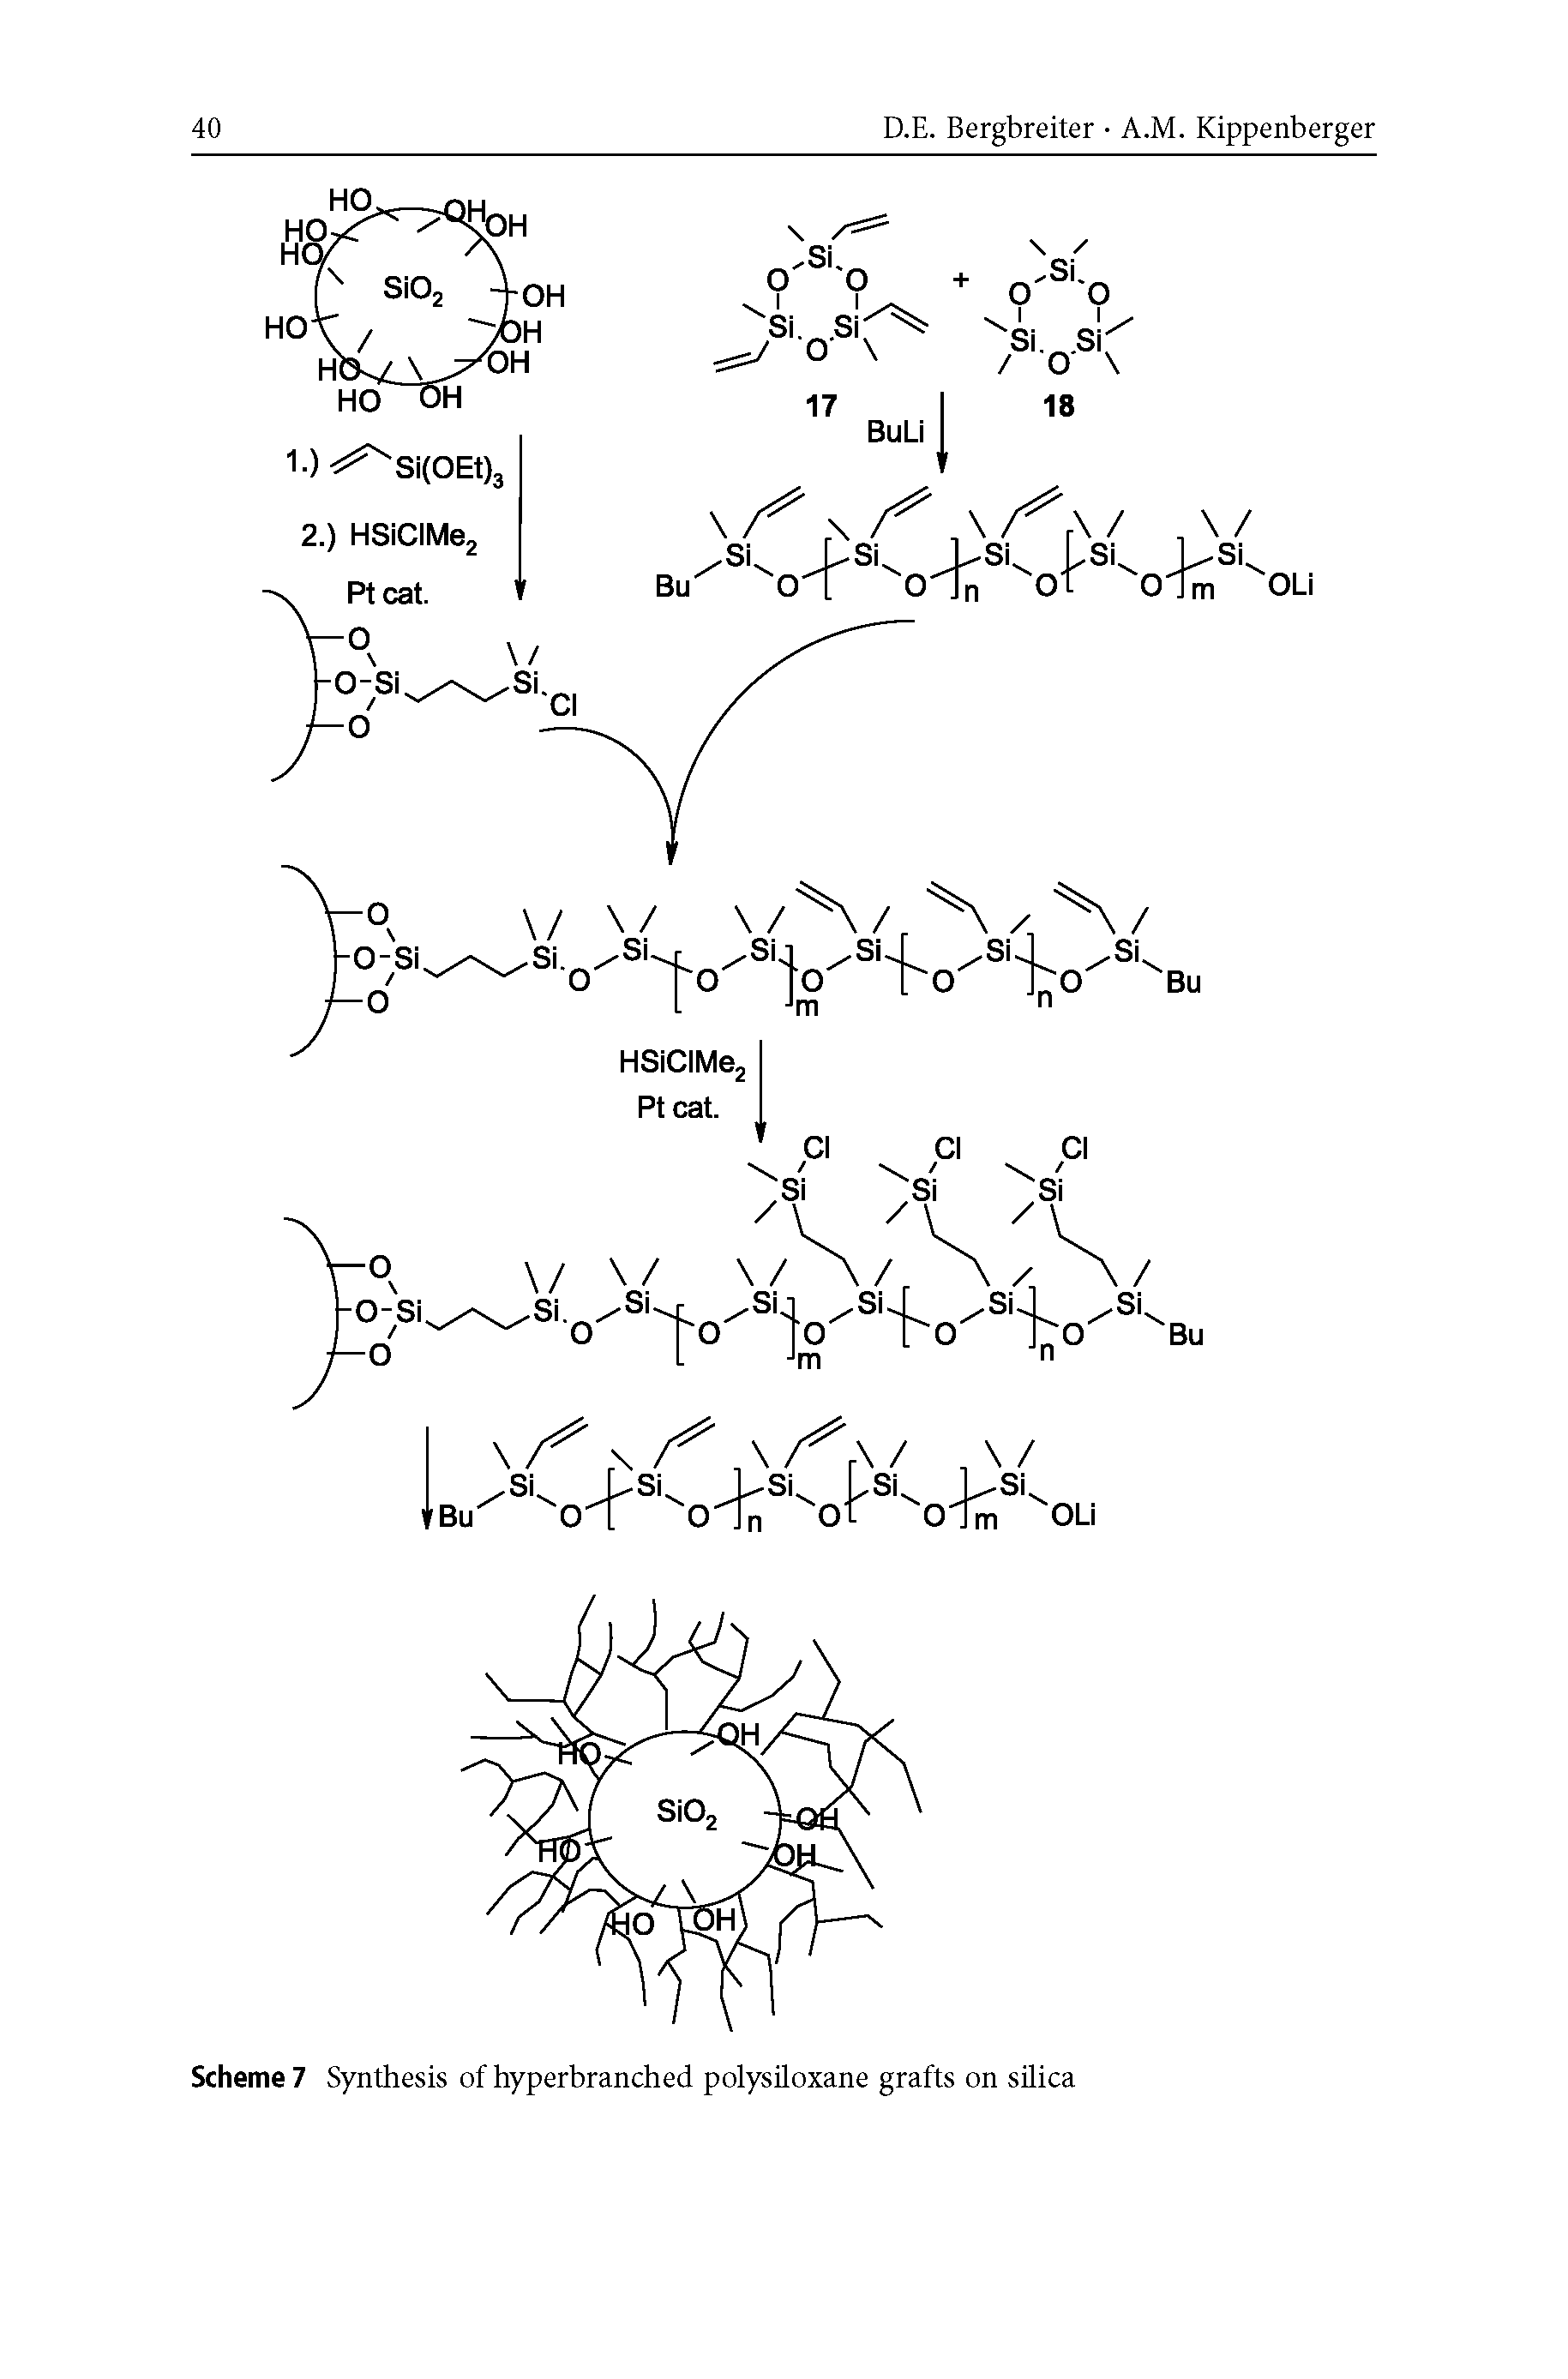 Scheme 7 Synthesis of hyperbranched polysiloxane grafts on silica...